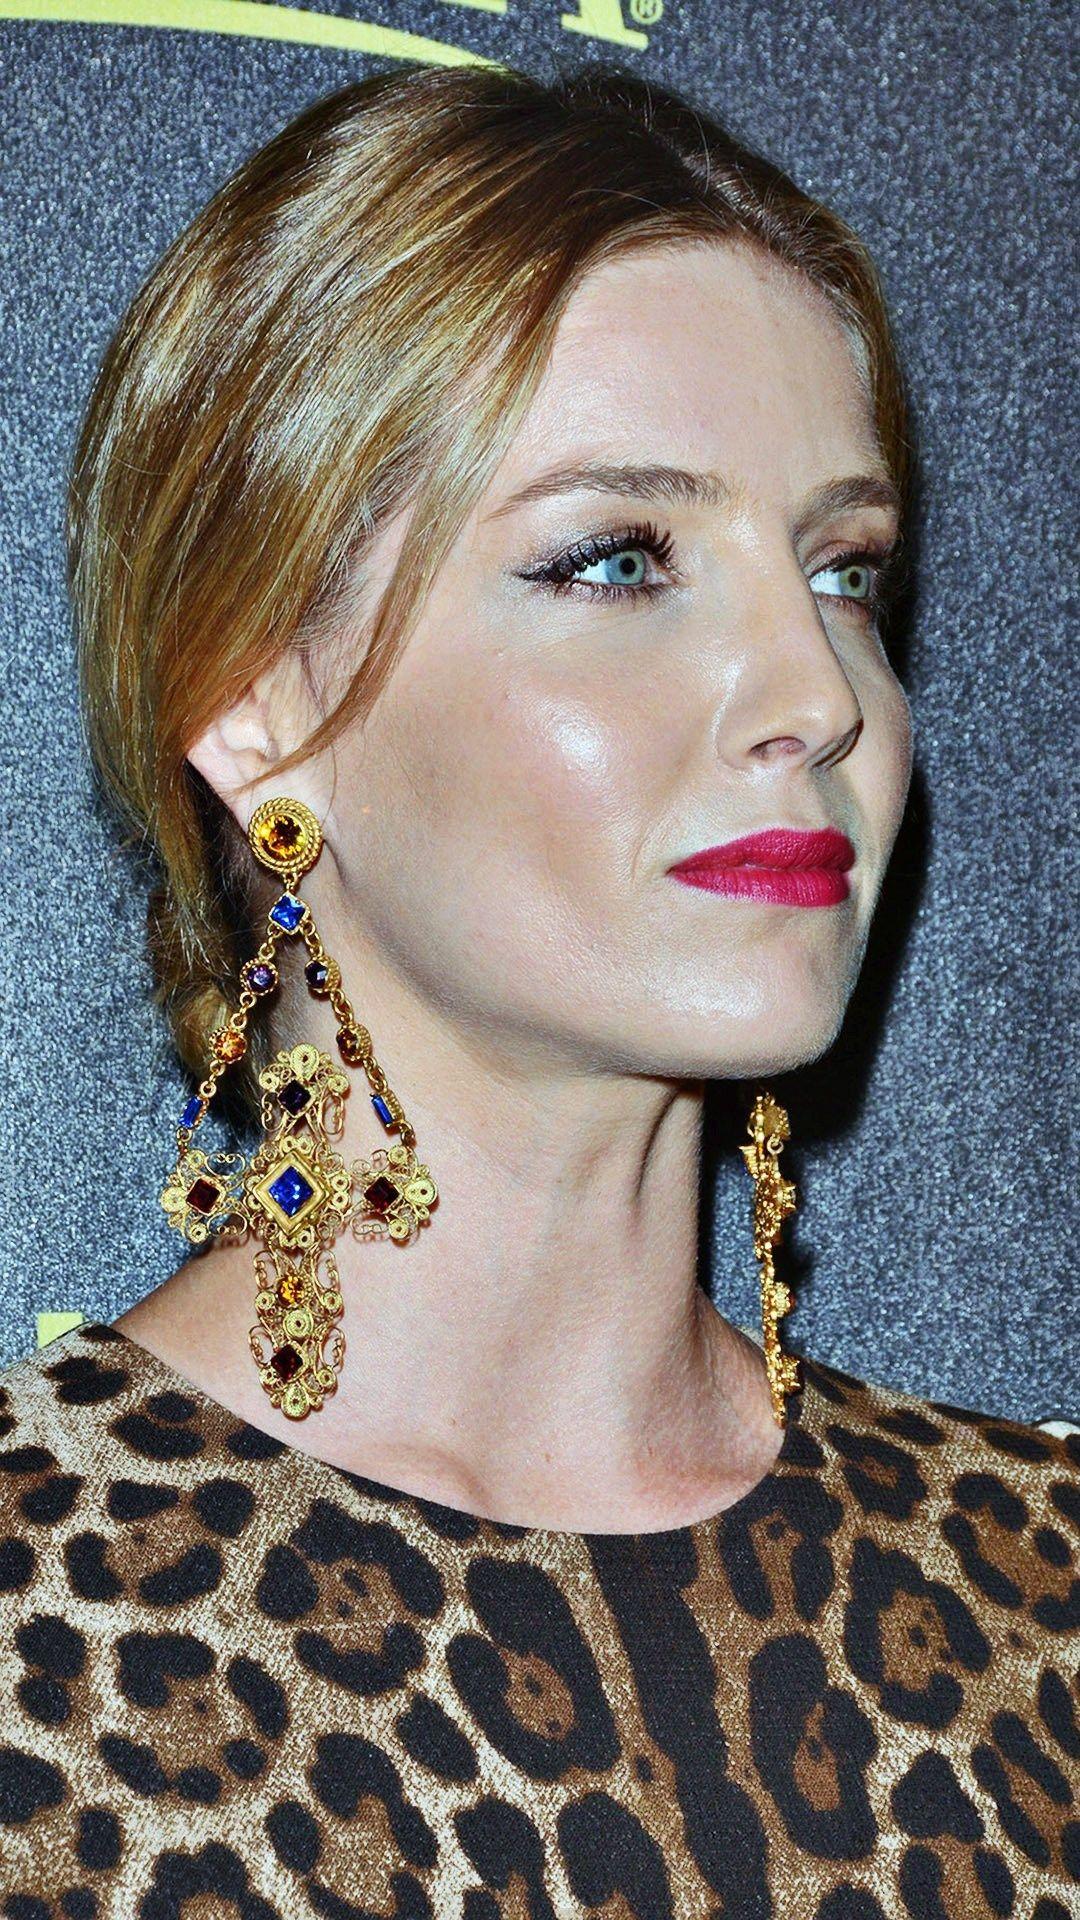 Annabelle Wallis. Known people people news and biographies